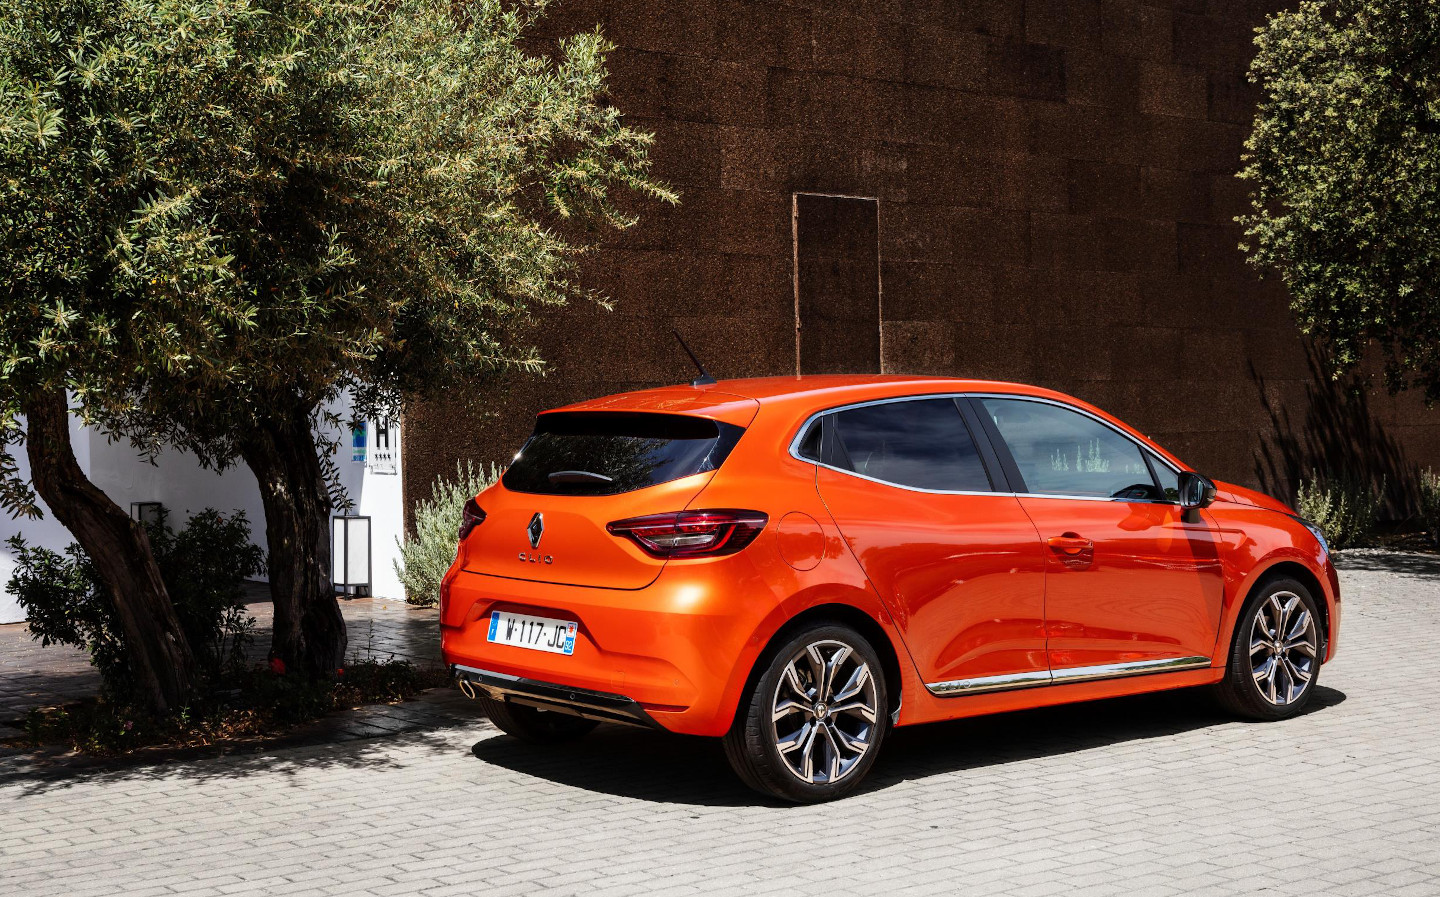 Is the 2020 Renault Clio a better car than the Ford Fiesta?